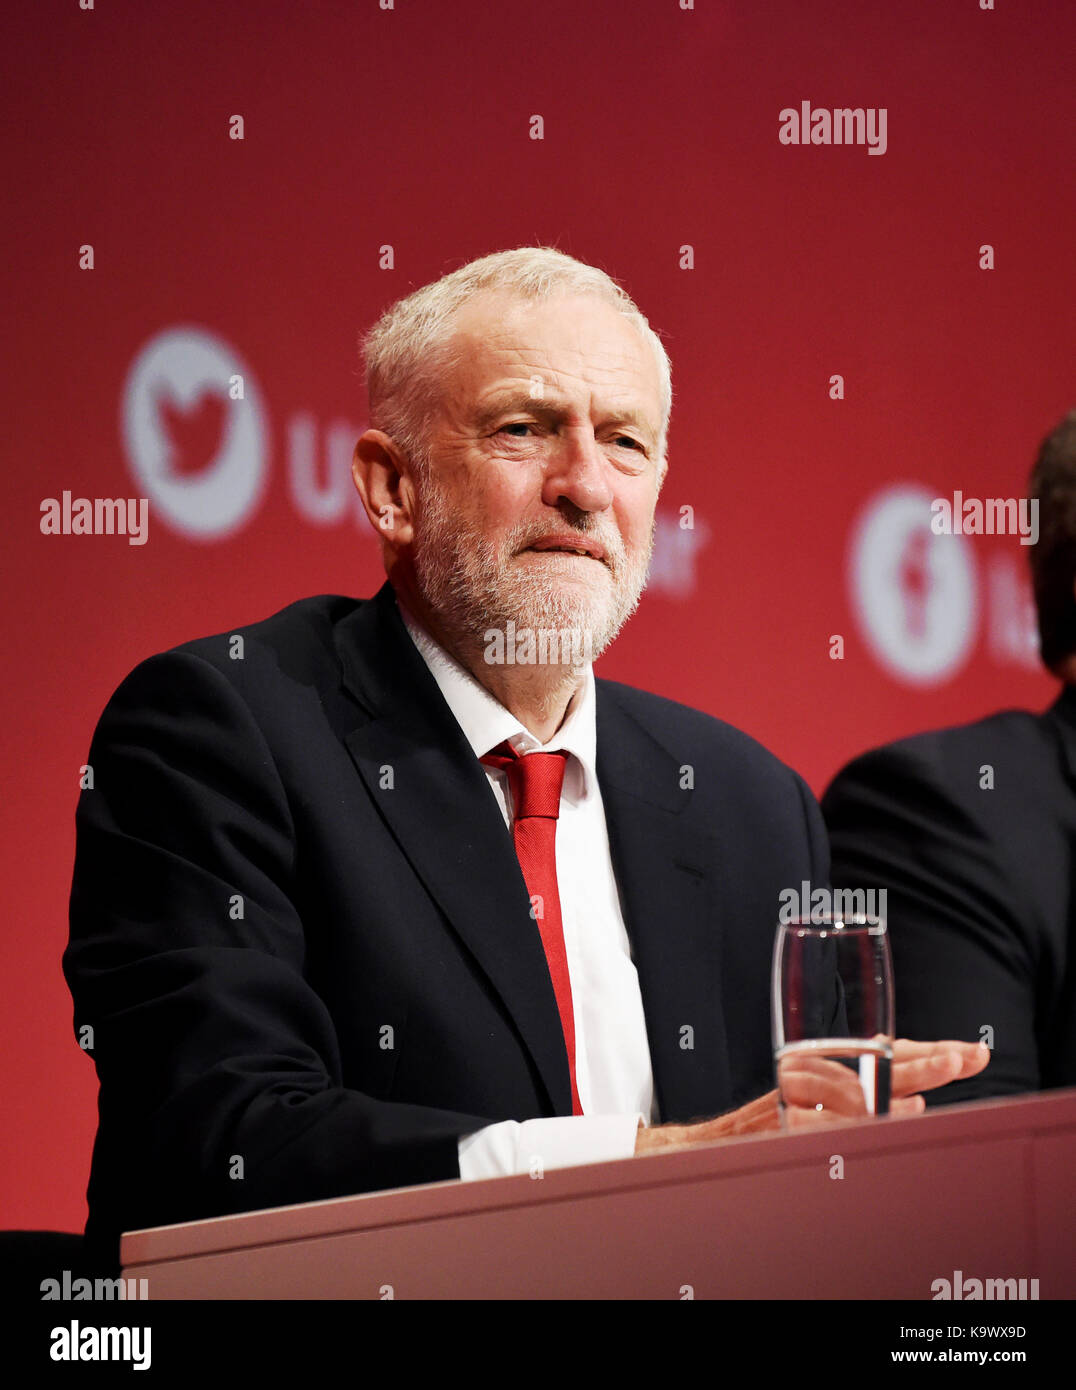 Brighton, UK. 24th Sep, 2017. Leader of the Labour Party Jeremy Corbyn at the opening day of the Labour Party Conference in the Brighton Centre . The Conference continues until the climax on Wednesday when Jeremy Corbyn delivers his leaders speech Credit: Simon Dack/Alamy Live News Stock Photo